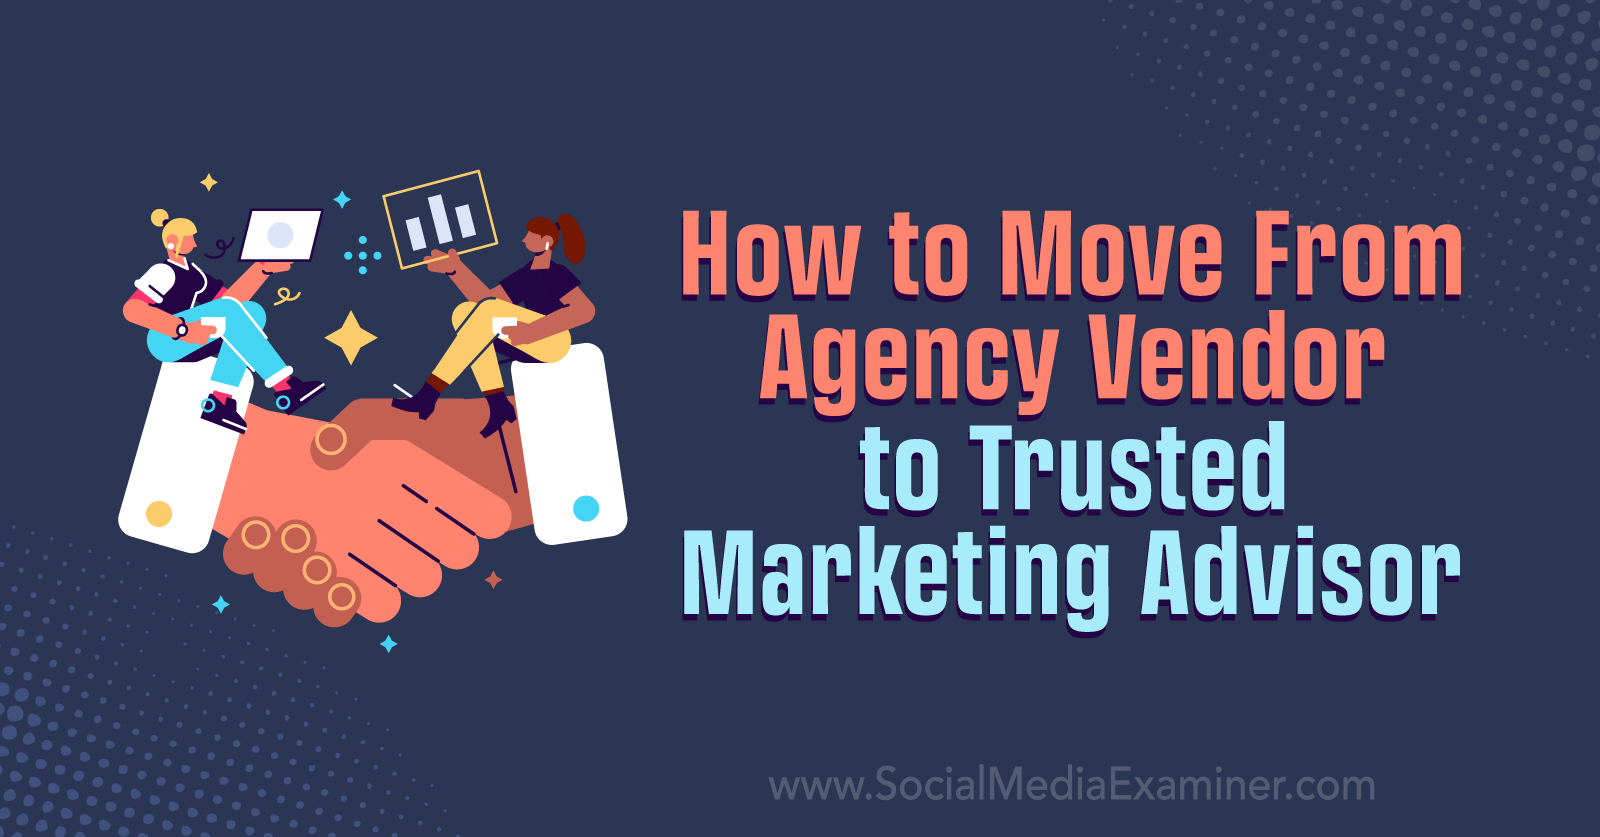 How to Move From Agency Vendor to Trusted Marketing Advisor by Social Media Examiner